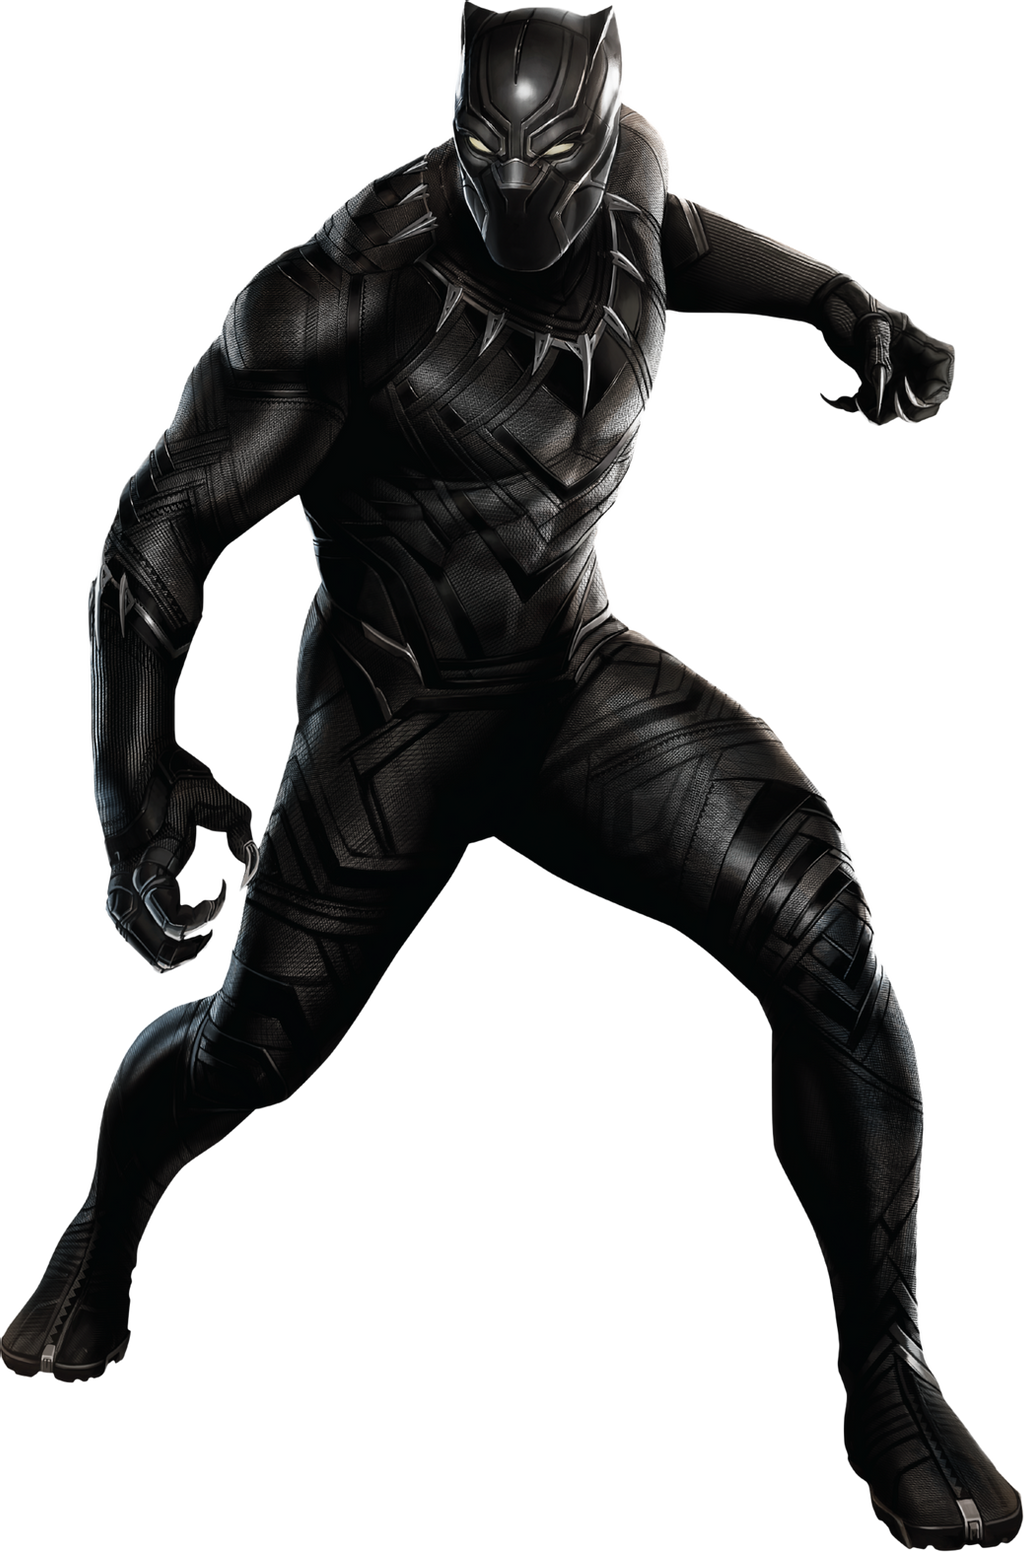 MARVEL Nero Panther PNG Immagine Trasparente